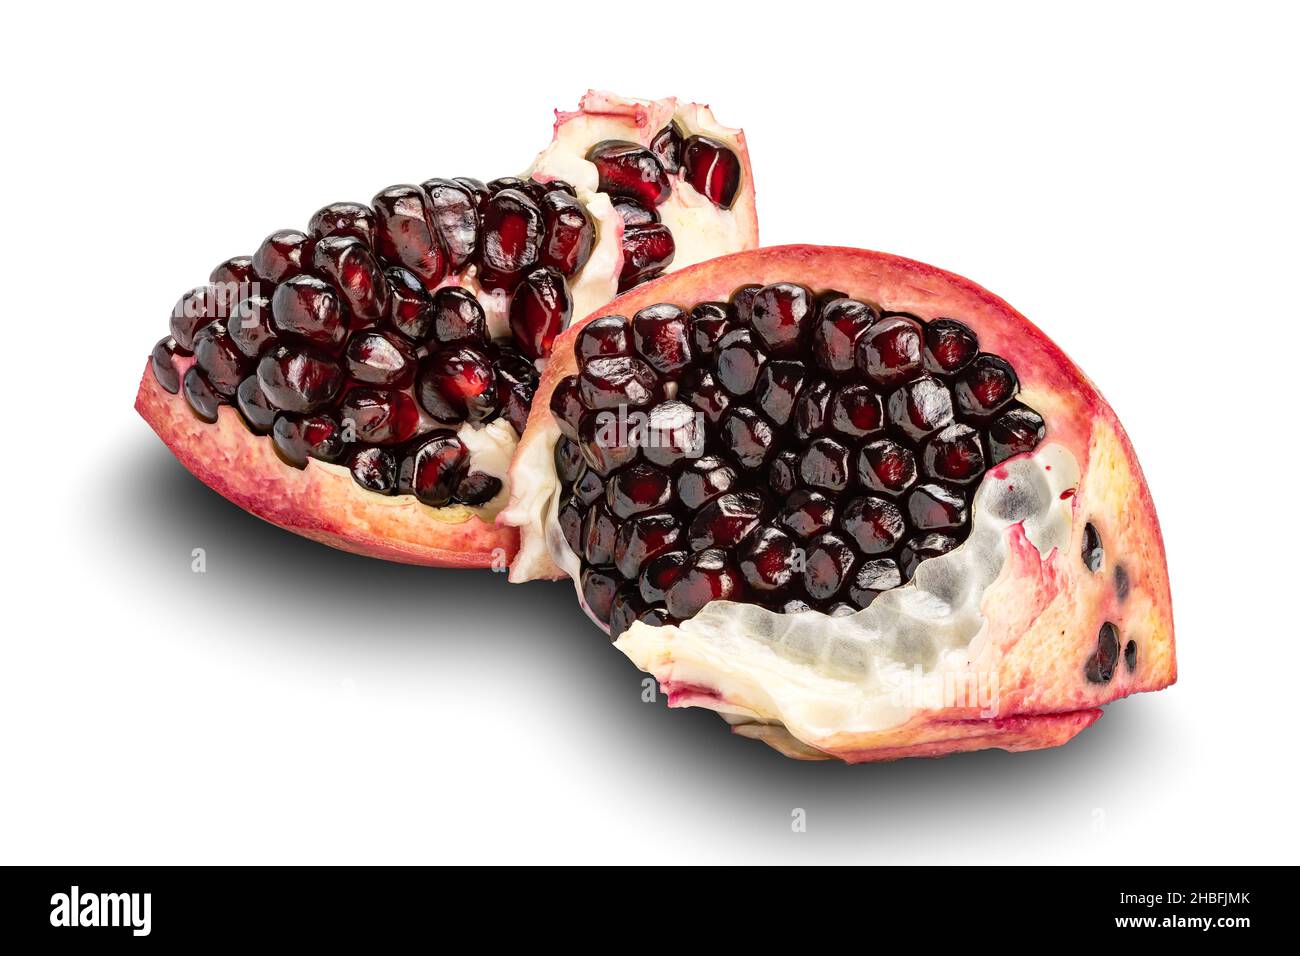 Pieces of ripe sweet pomegranate isolated on white background with clipping path. Stock Photo